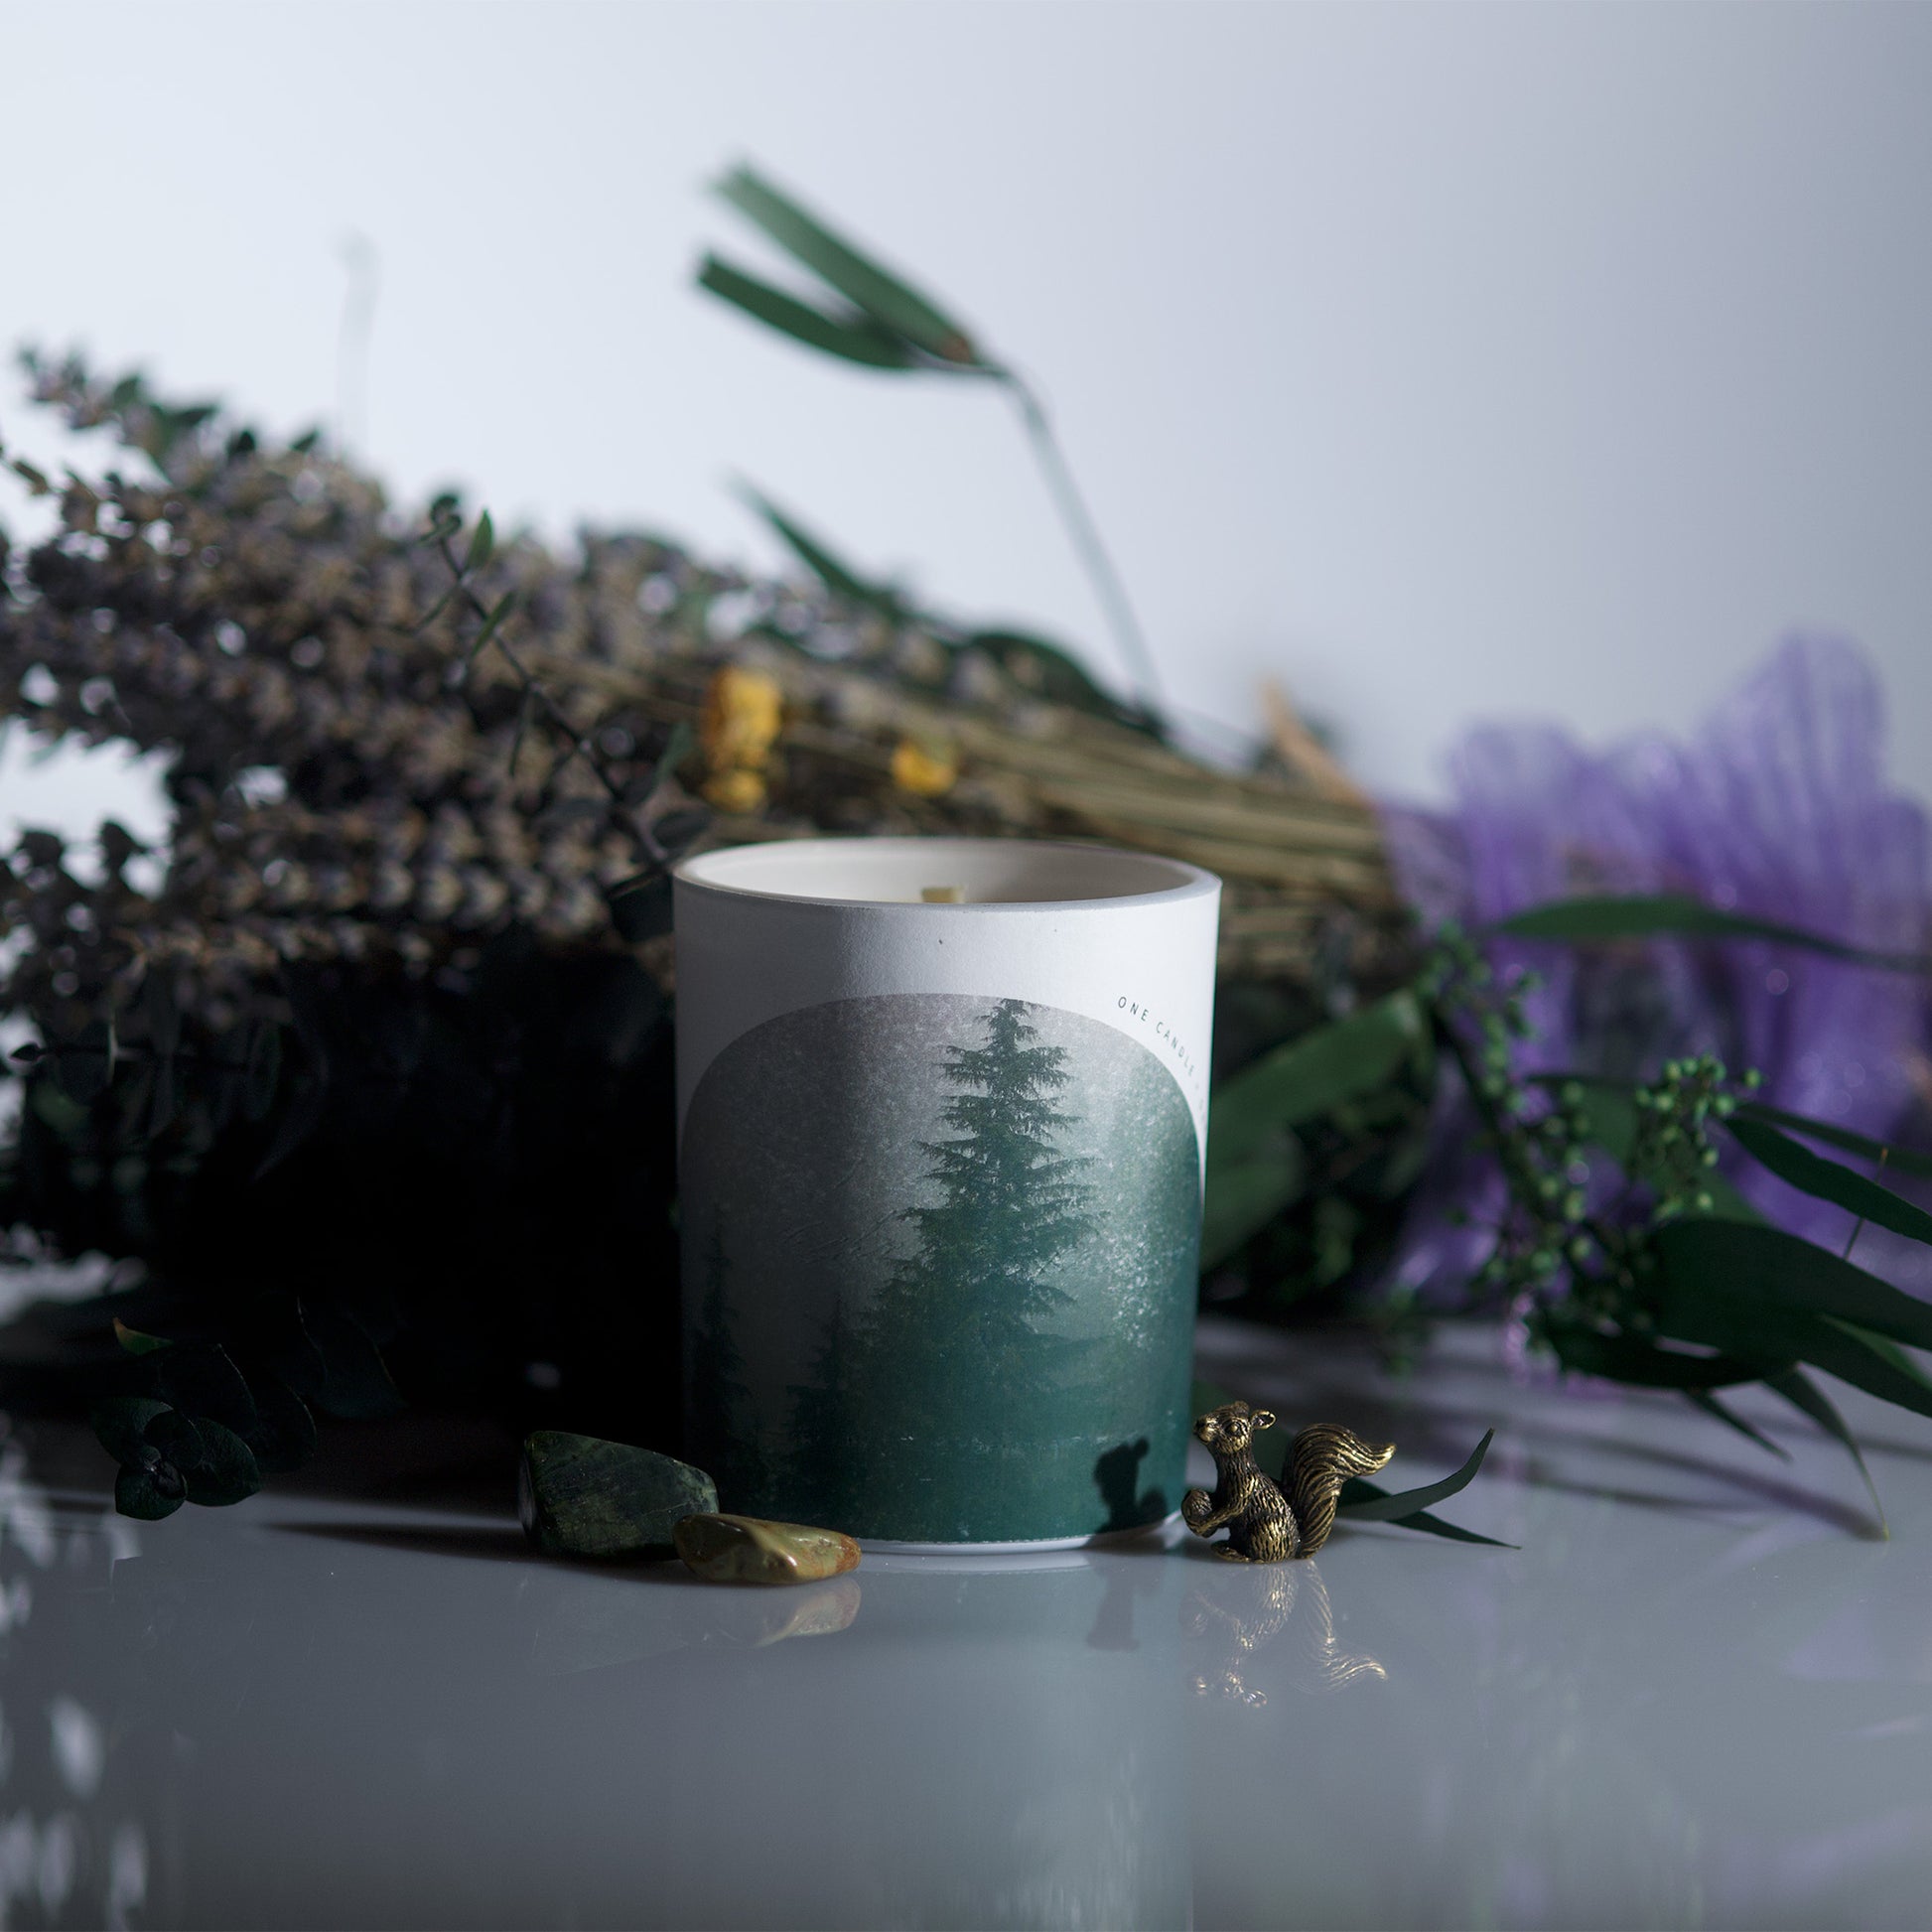 Cypress & Cedar or Amber & Oakmoss Scented Beeswax Candle